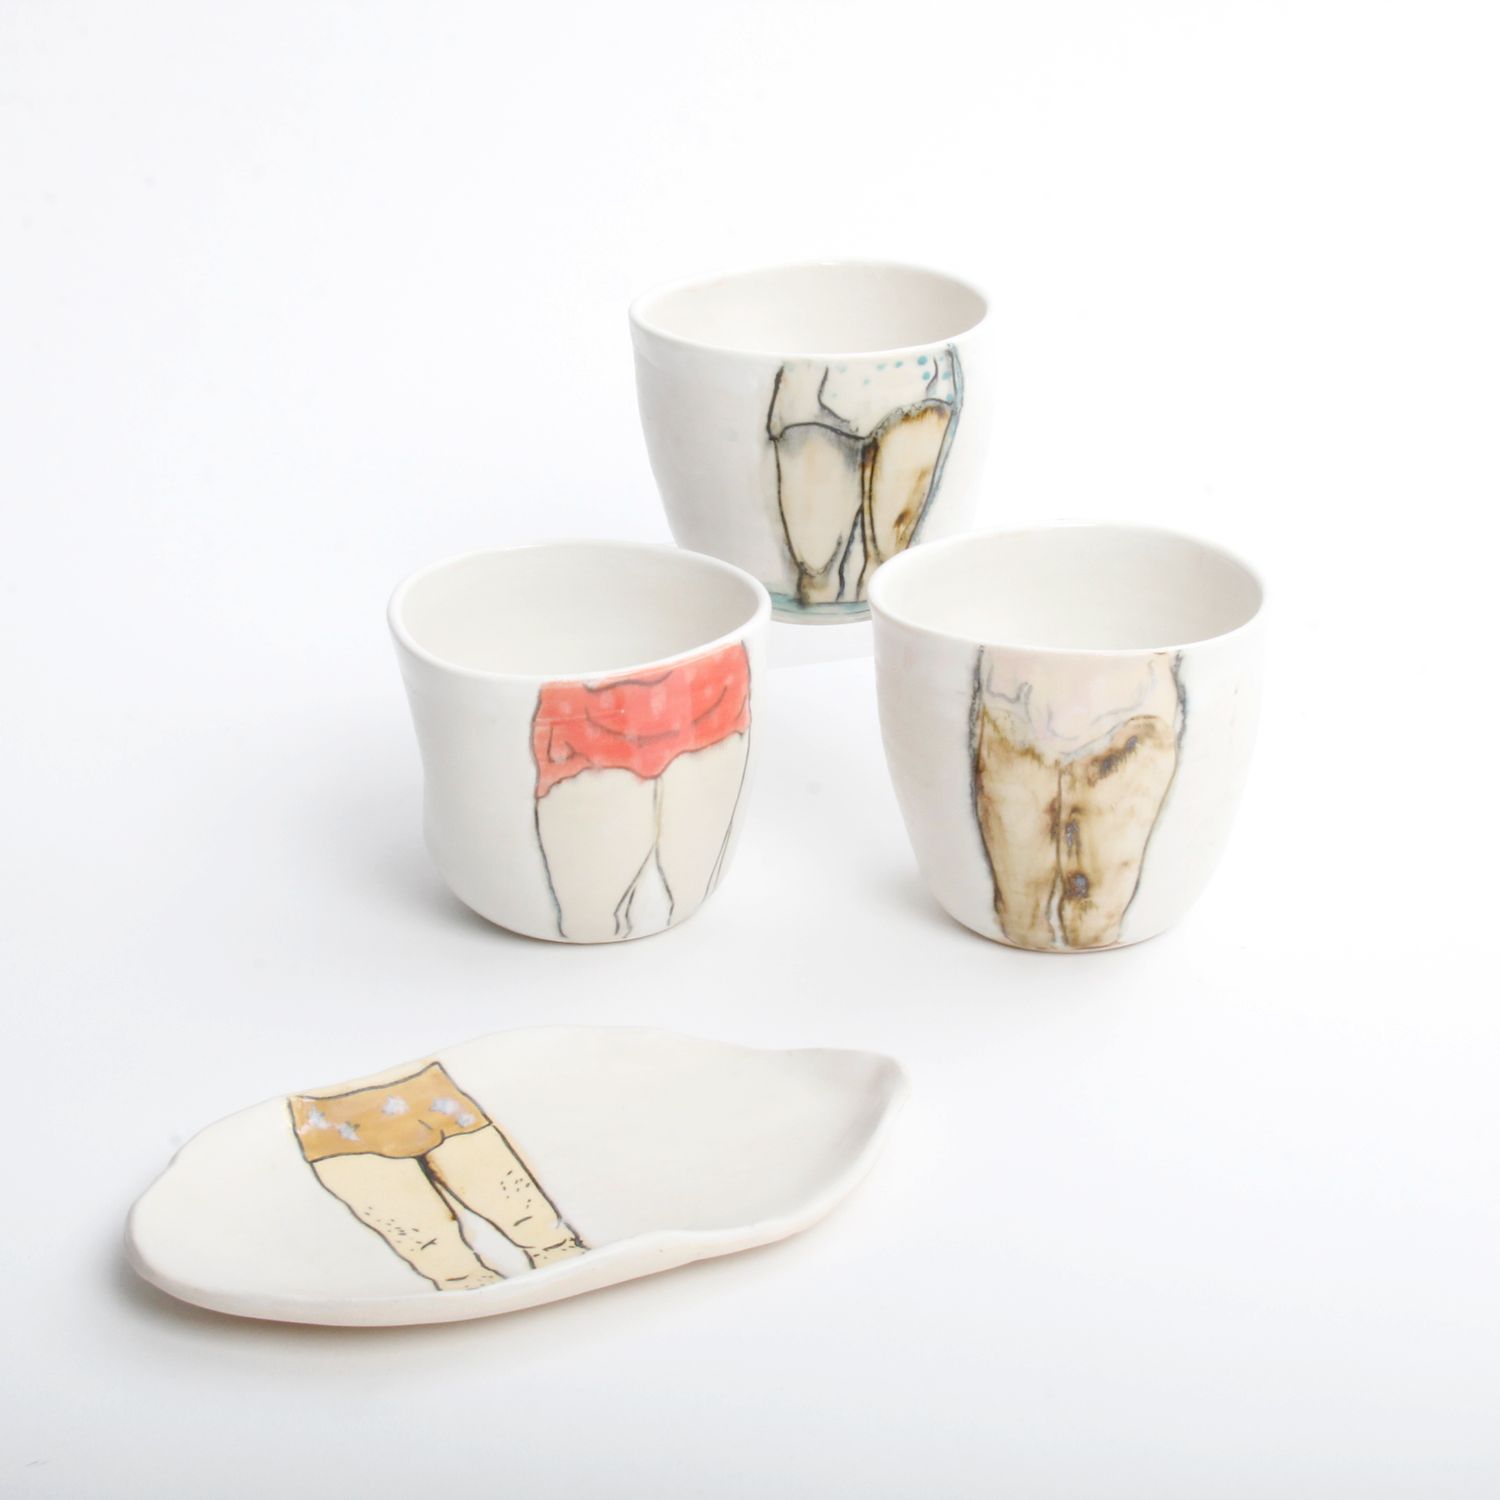 Lindsay Gravelle: Swimmer Tumblers (Assorted) Product Image 5 of 5